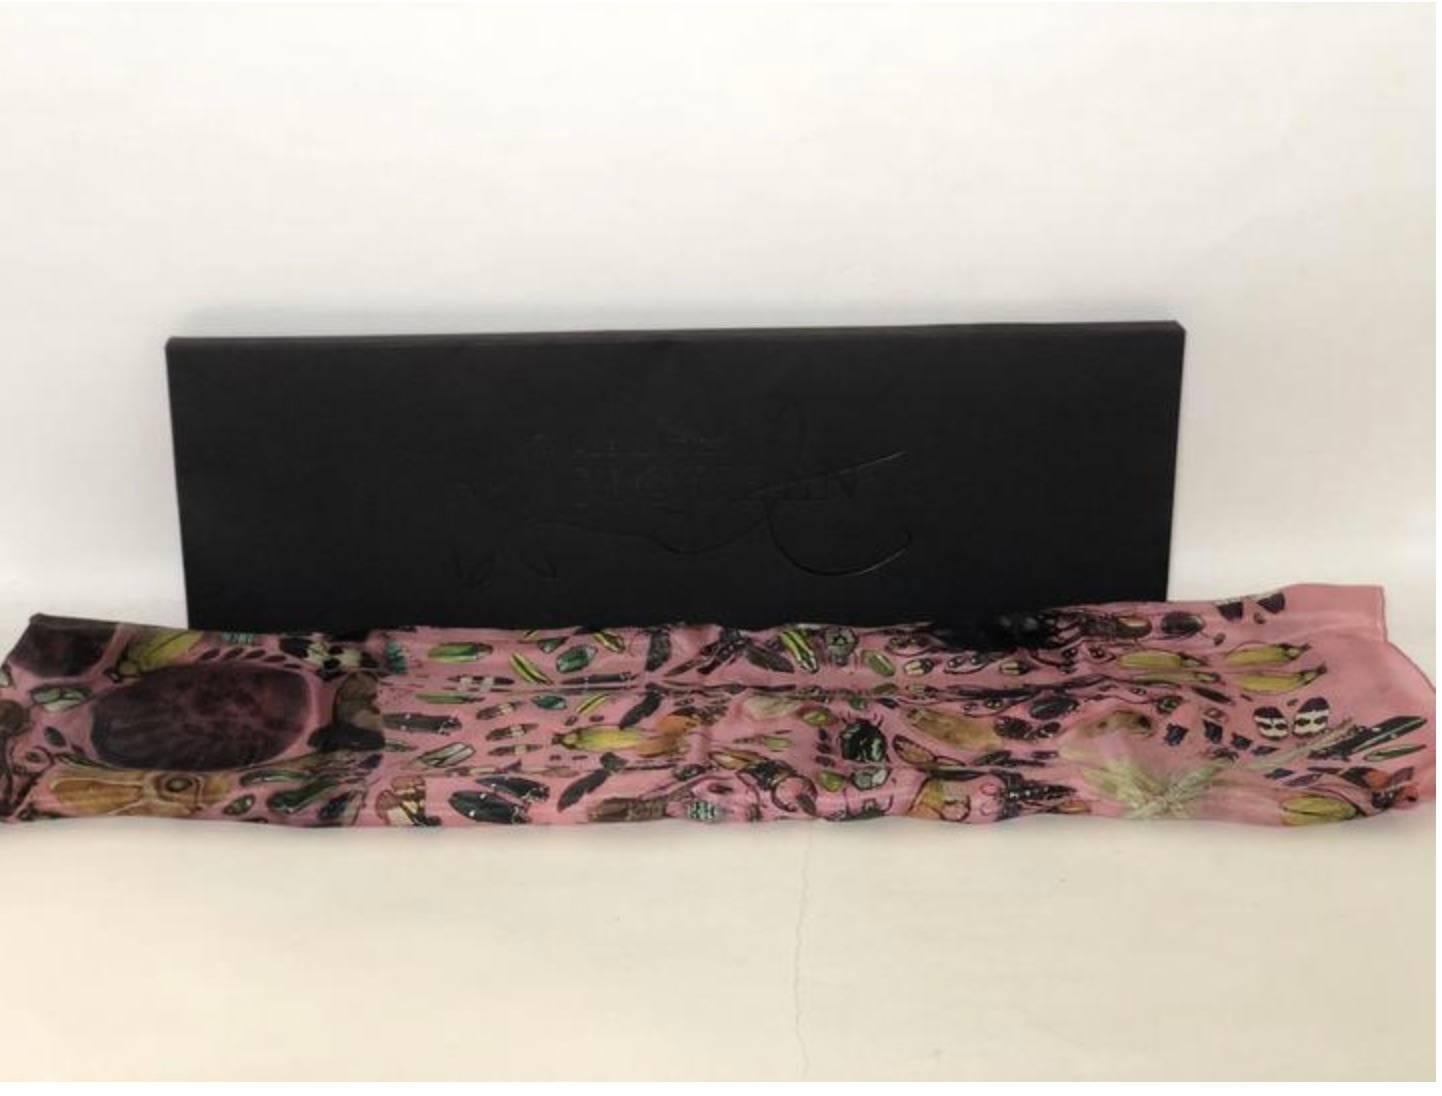 MODEL - Alexander McQueen and Damien Hirst Limited Edition 100% Silk Judecca Skull Scarf

CONDITION - Exceptional. No signs of wear.

SKU - 2330

DIMENSIONS - L55 x H55 x D.01

MATERIAL - Silk 

COMES WITH - Original Box

AVAILABLE IN STORE -